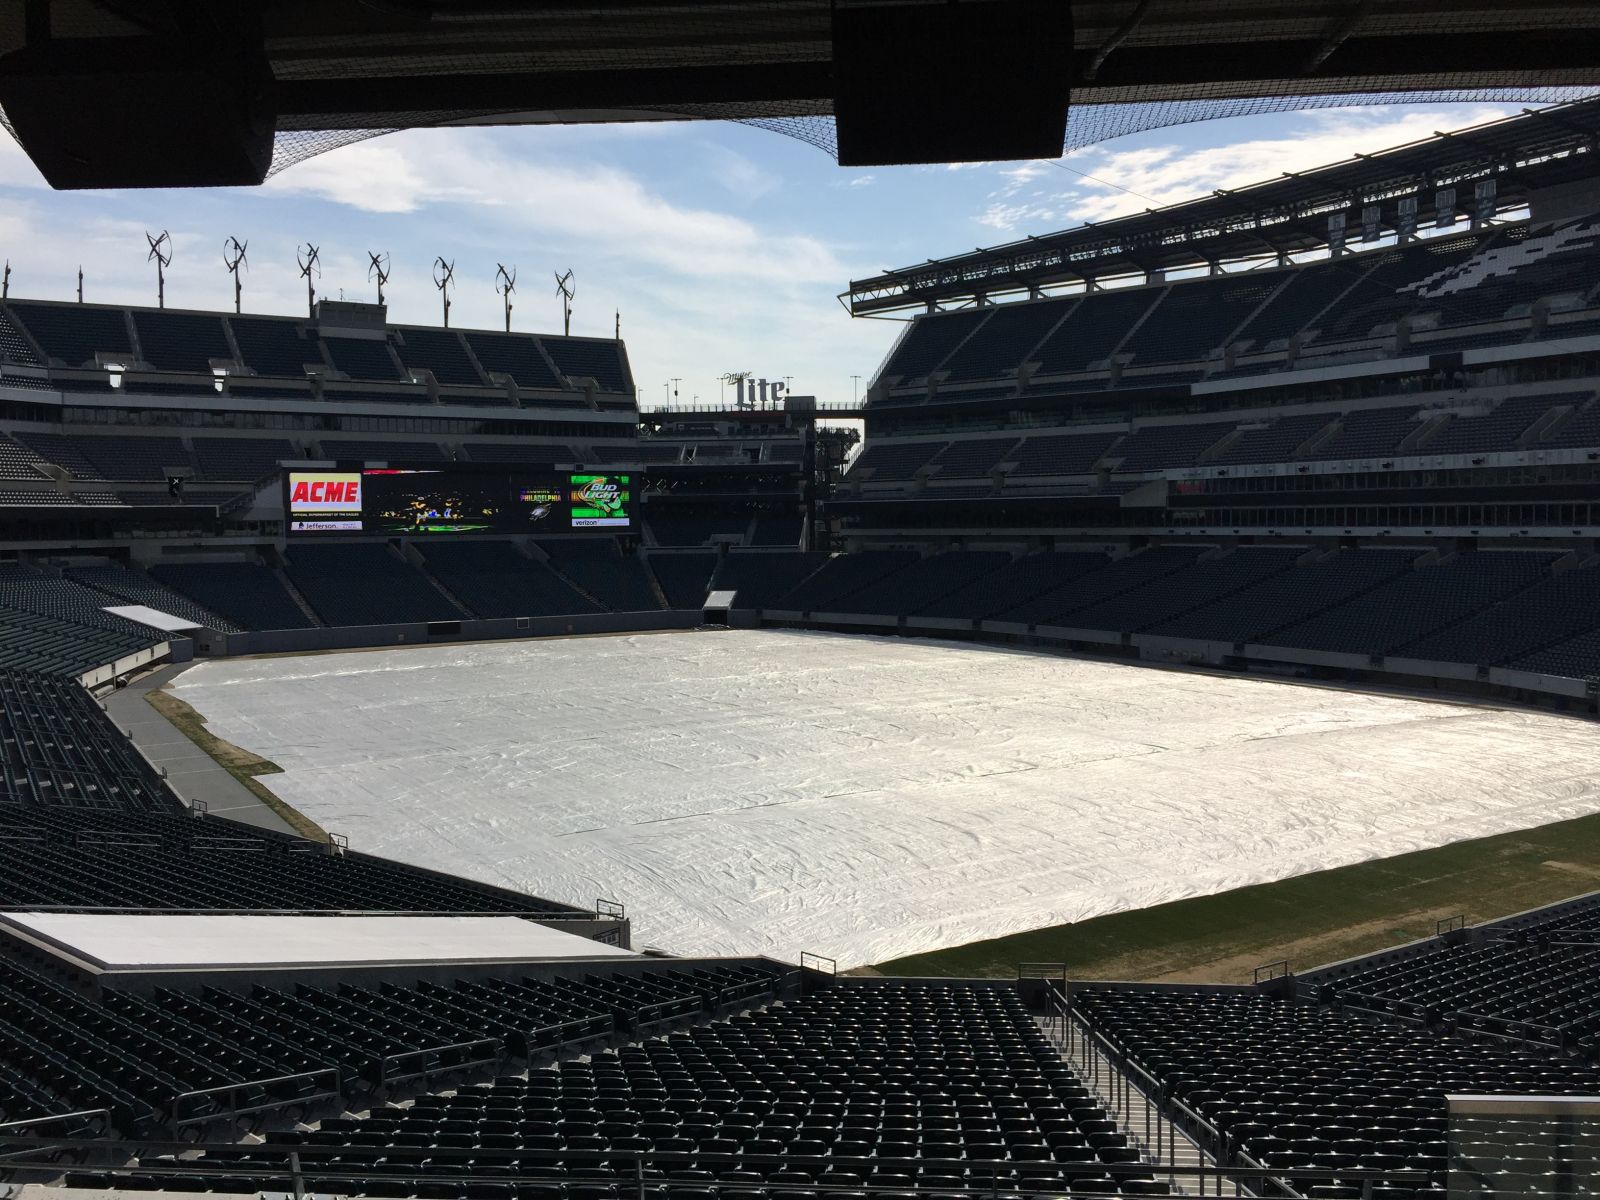 northeast terrace 1, row 5 seat view  for football - lincoln financial field